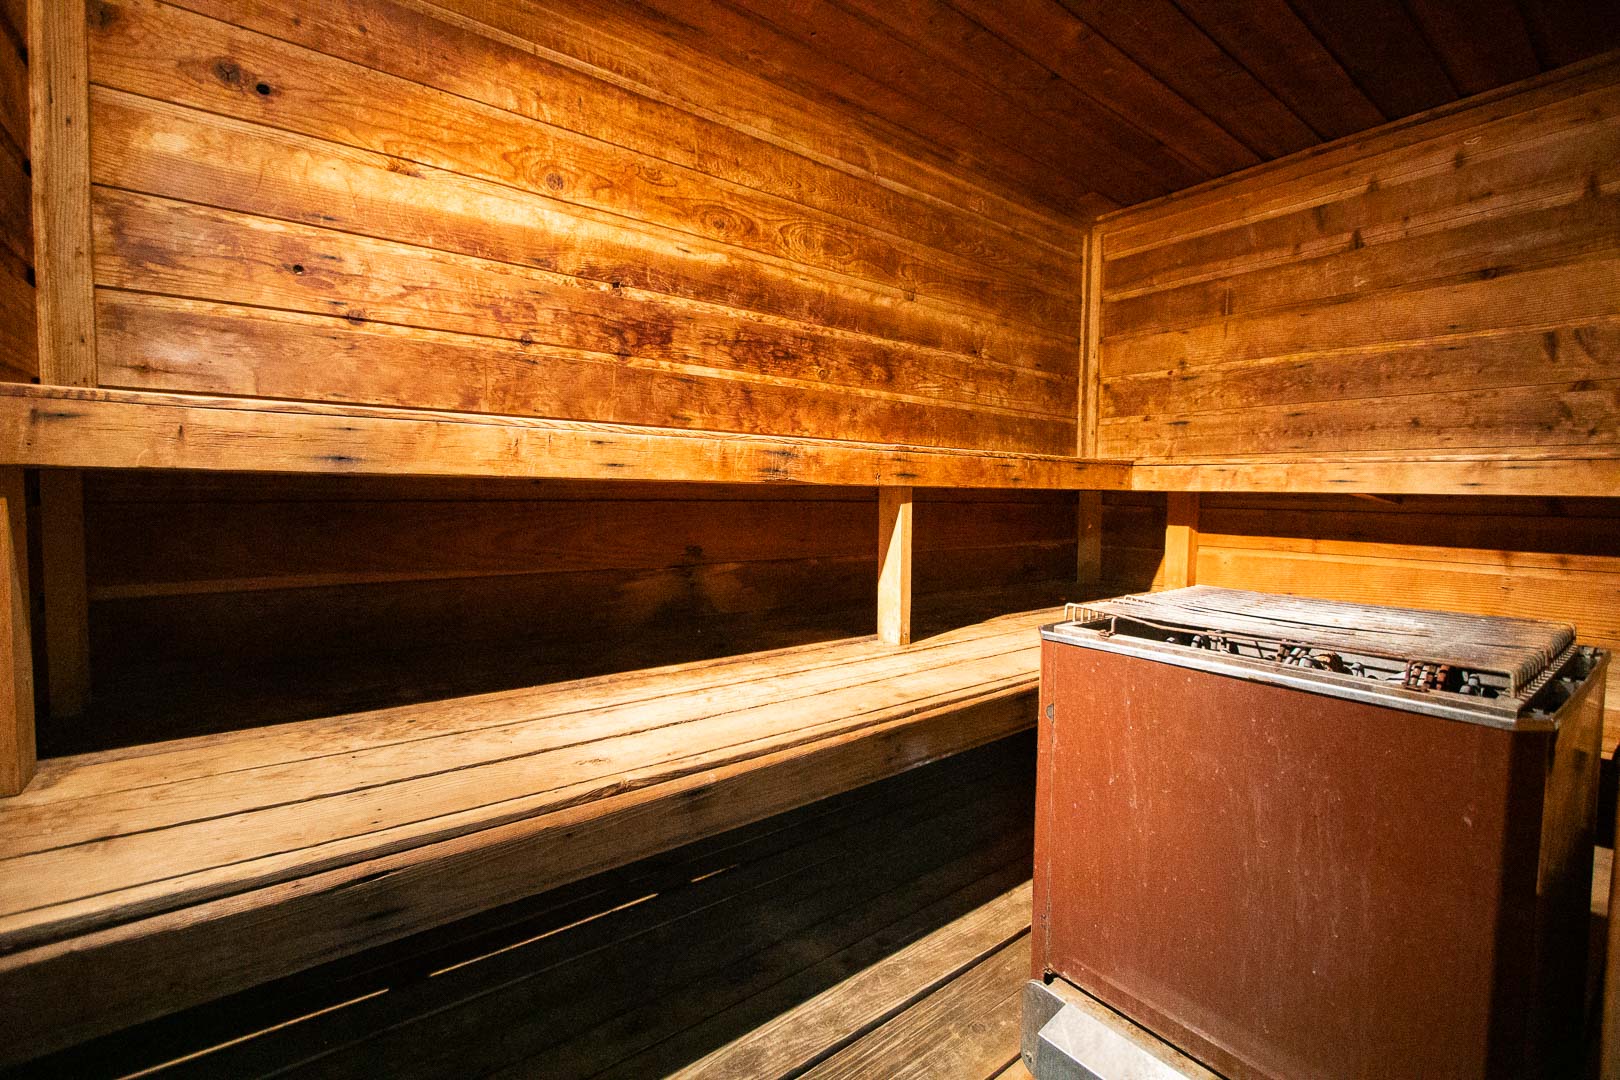 A relaxing sauna room available at VRI's Barrier Island Station in North Carolina.